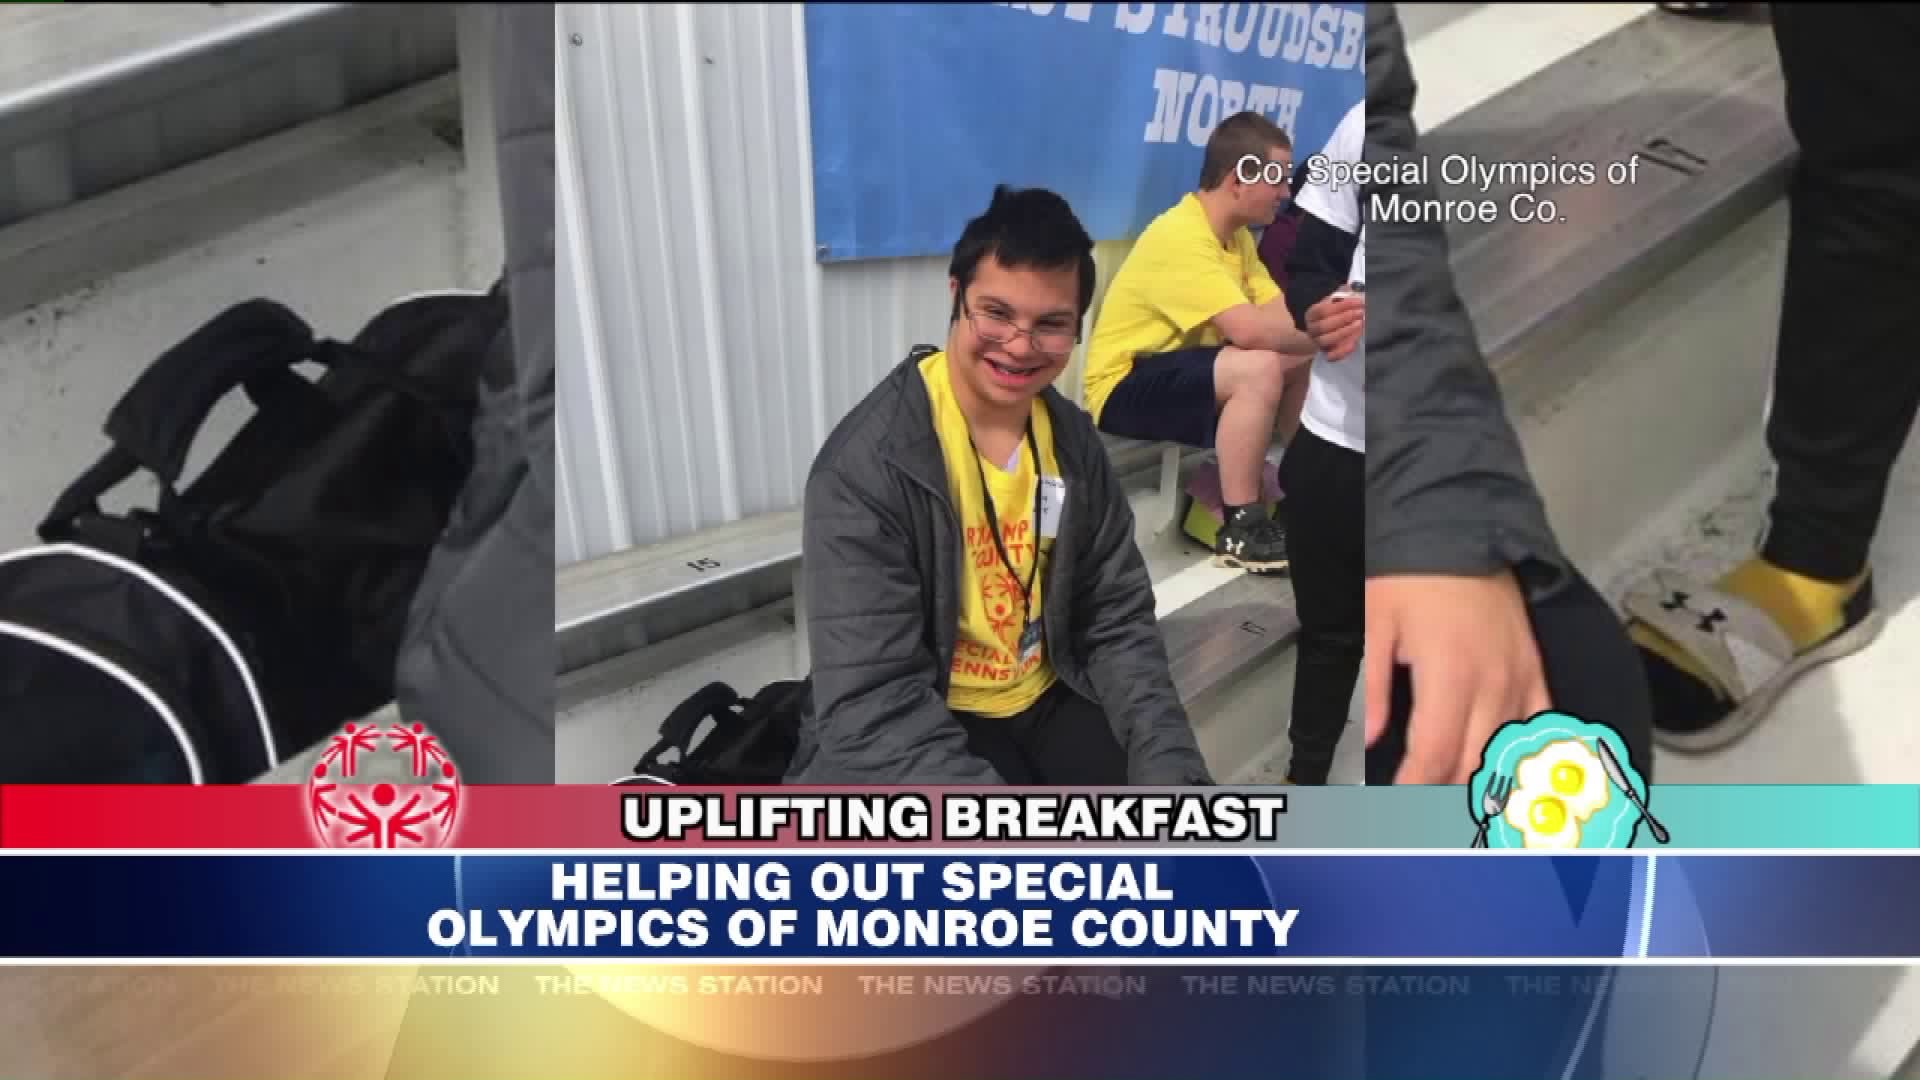 Helping Out the Special Olympics of Monroe County